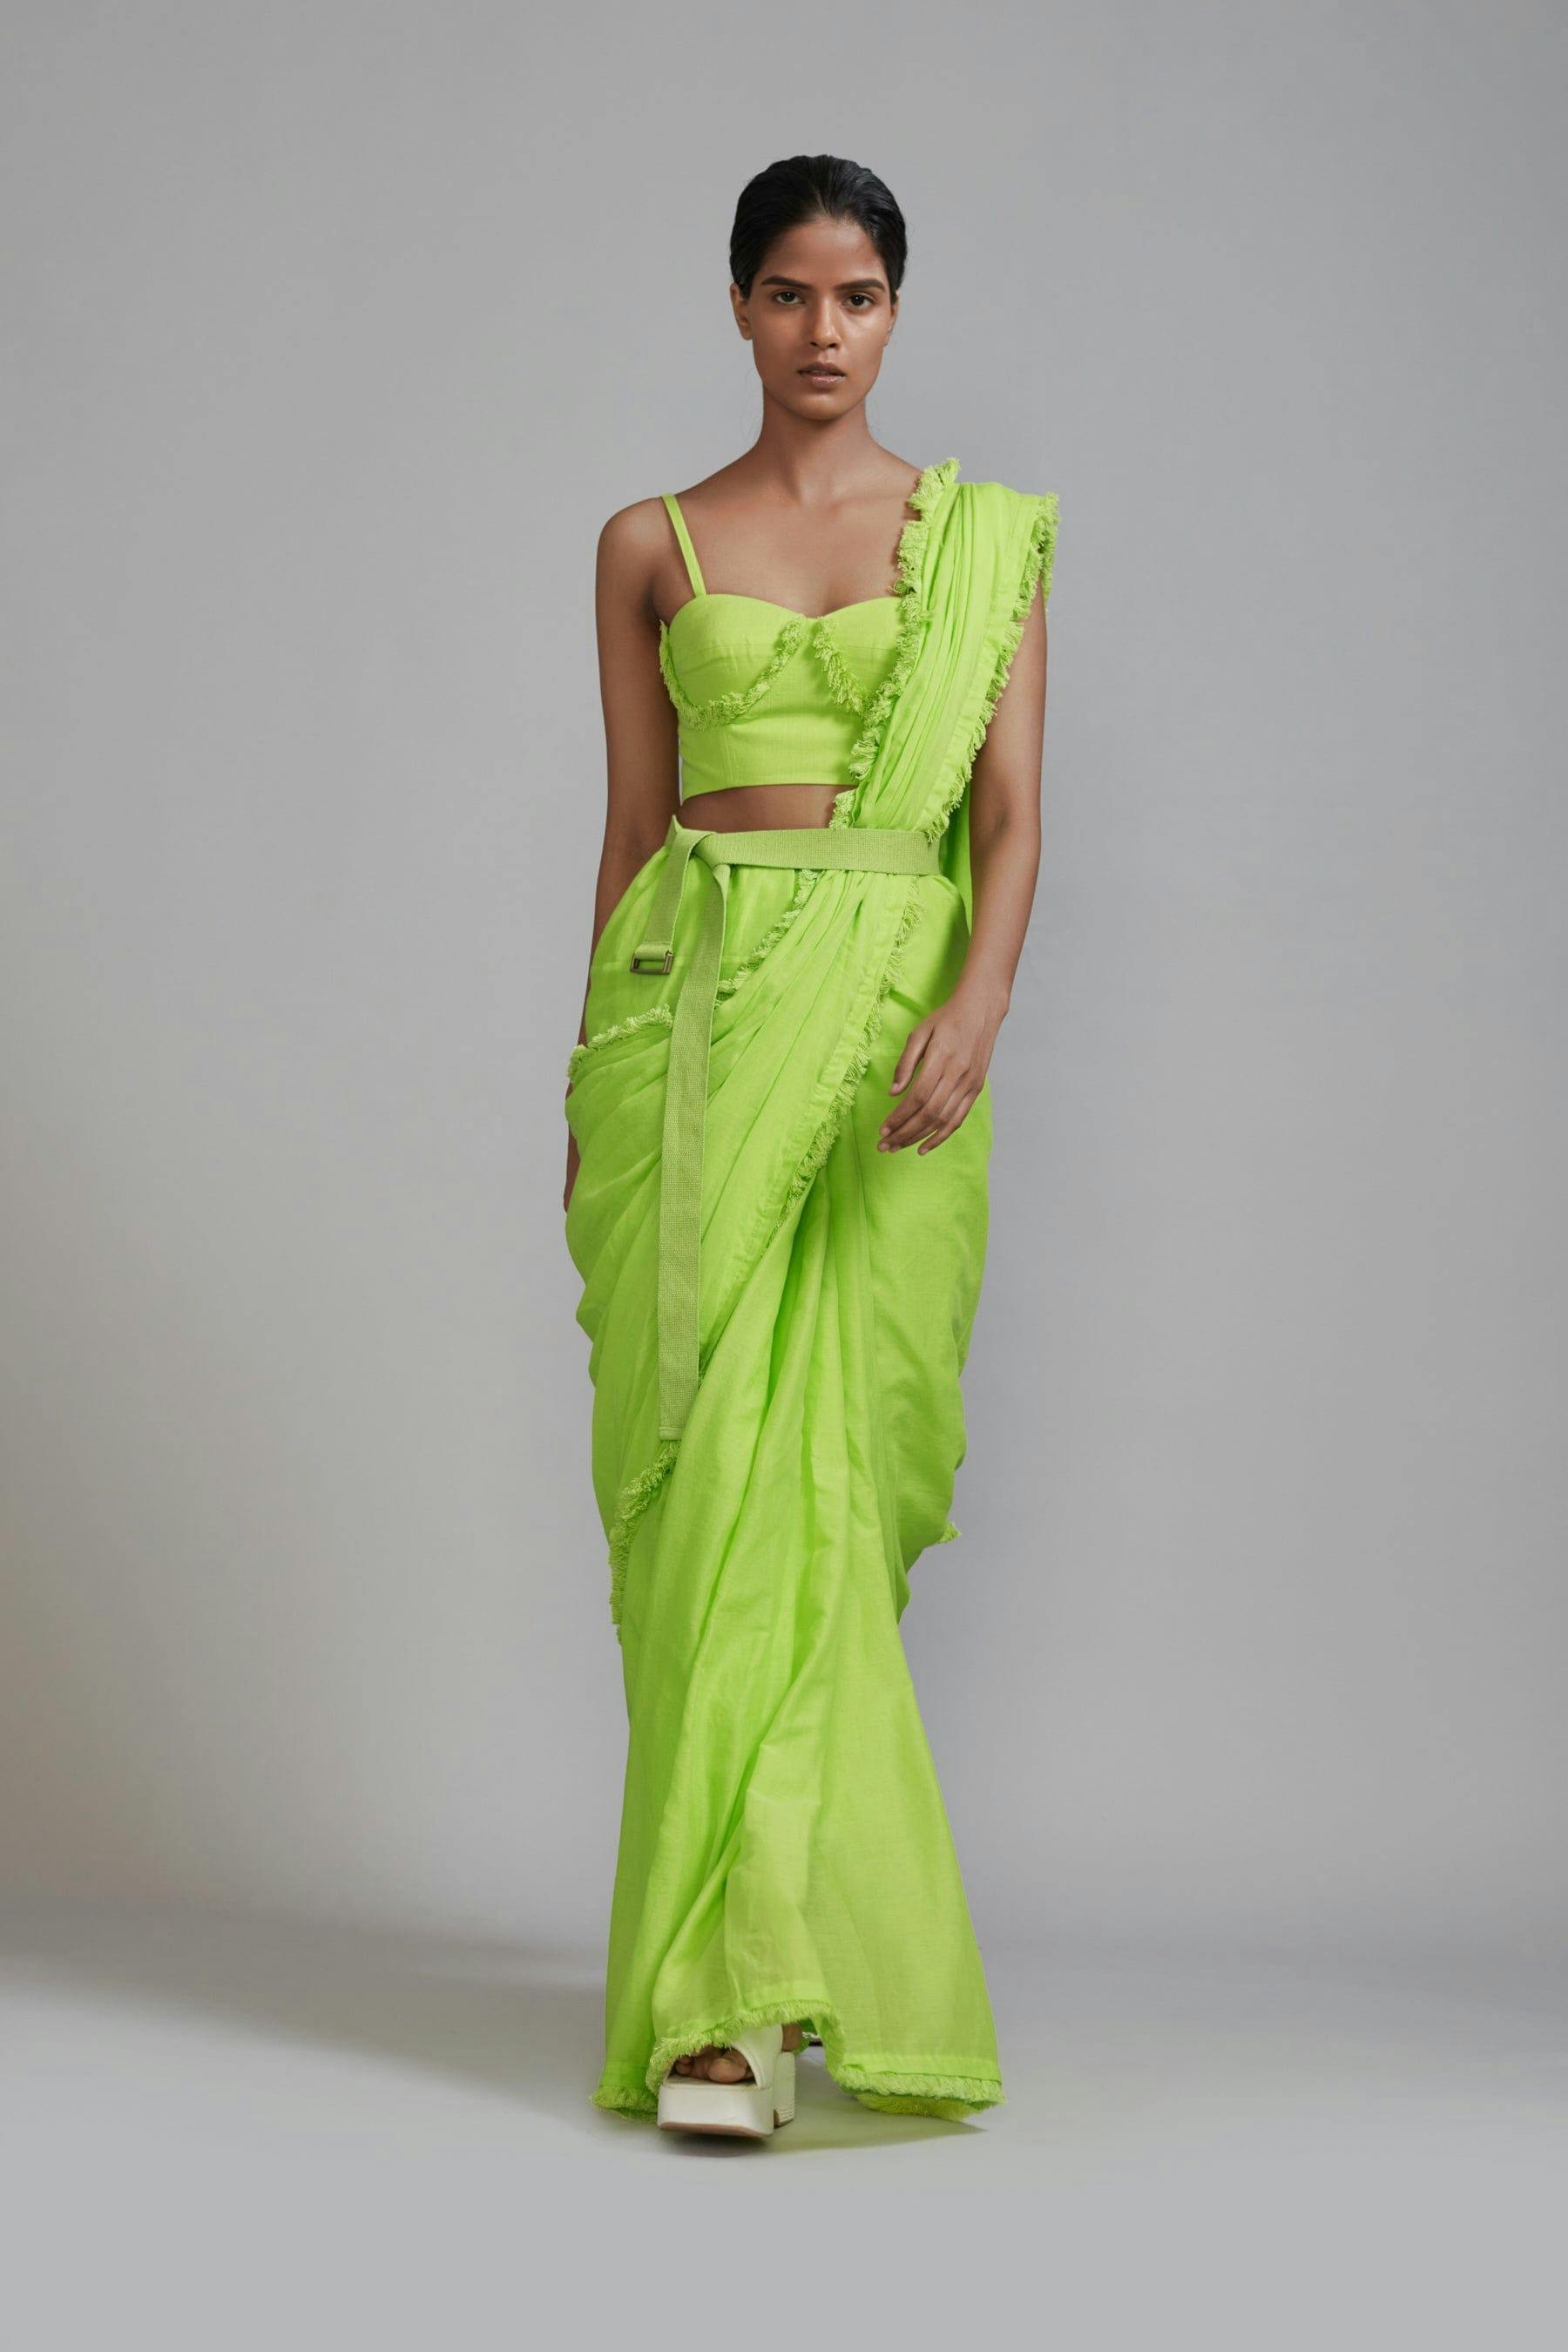 Thumbnail preview #0 for Neon Green Fringed Saree